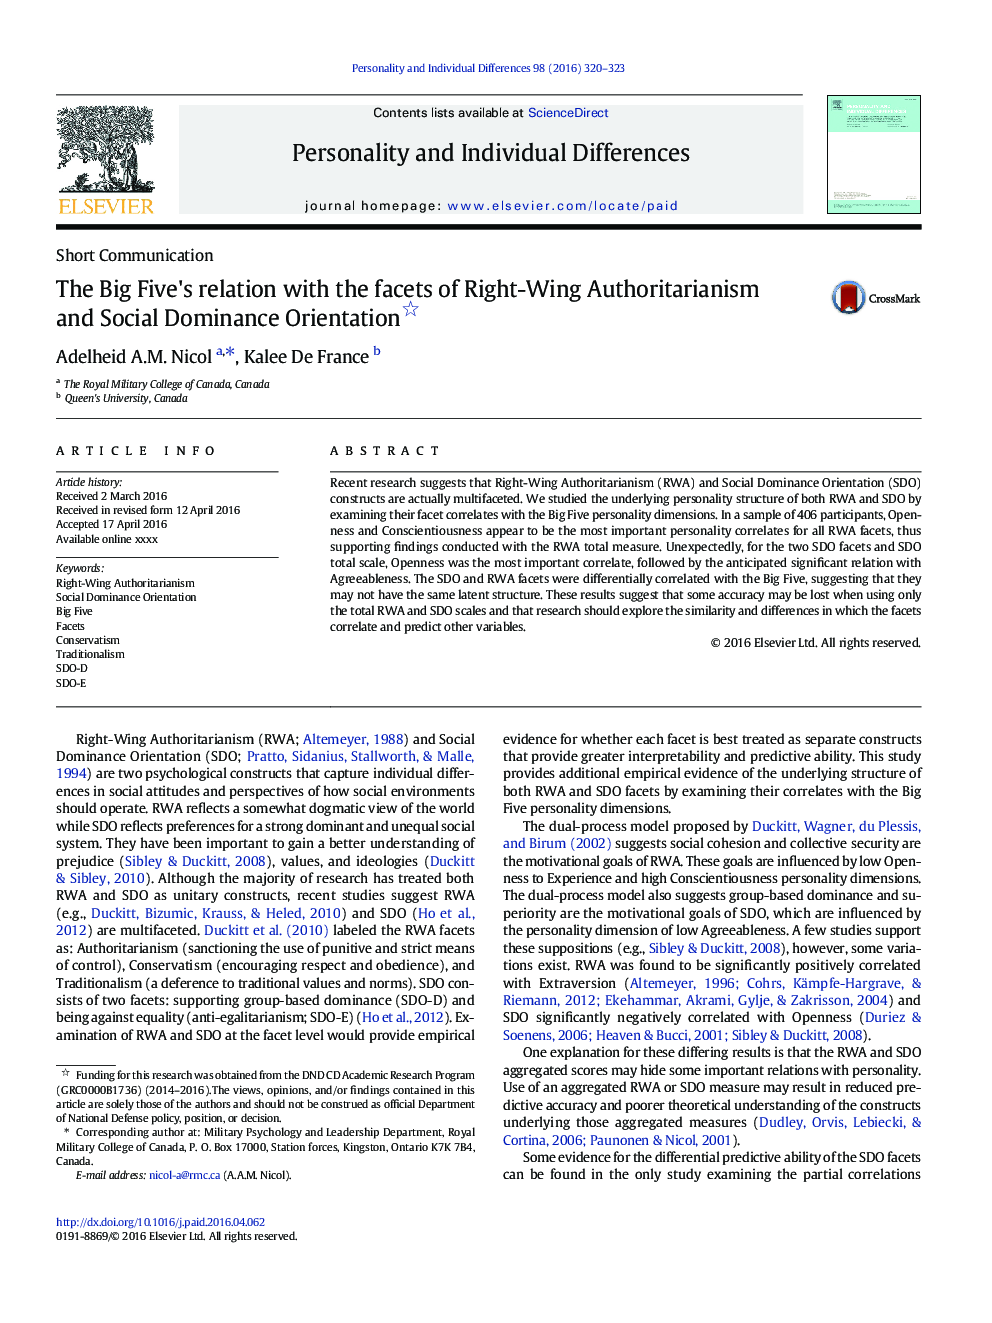 The Big Five's relation with the facets of Right-Wing Authoritarianism and Social Dominance Orientation